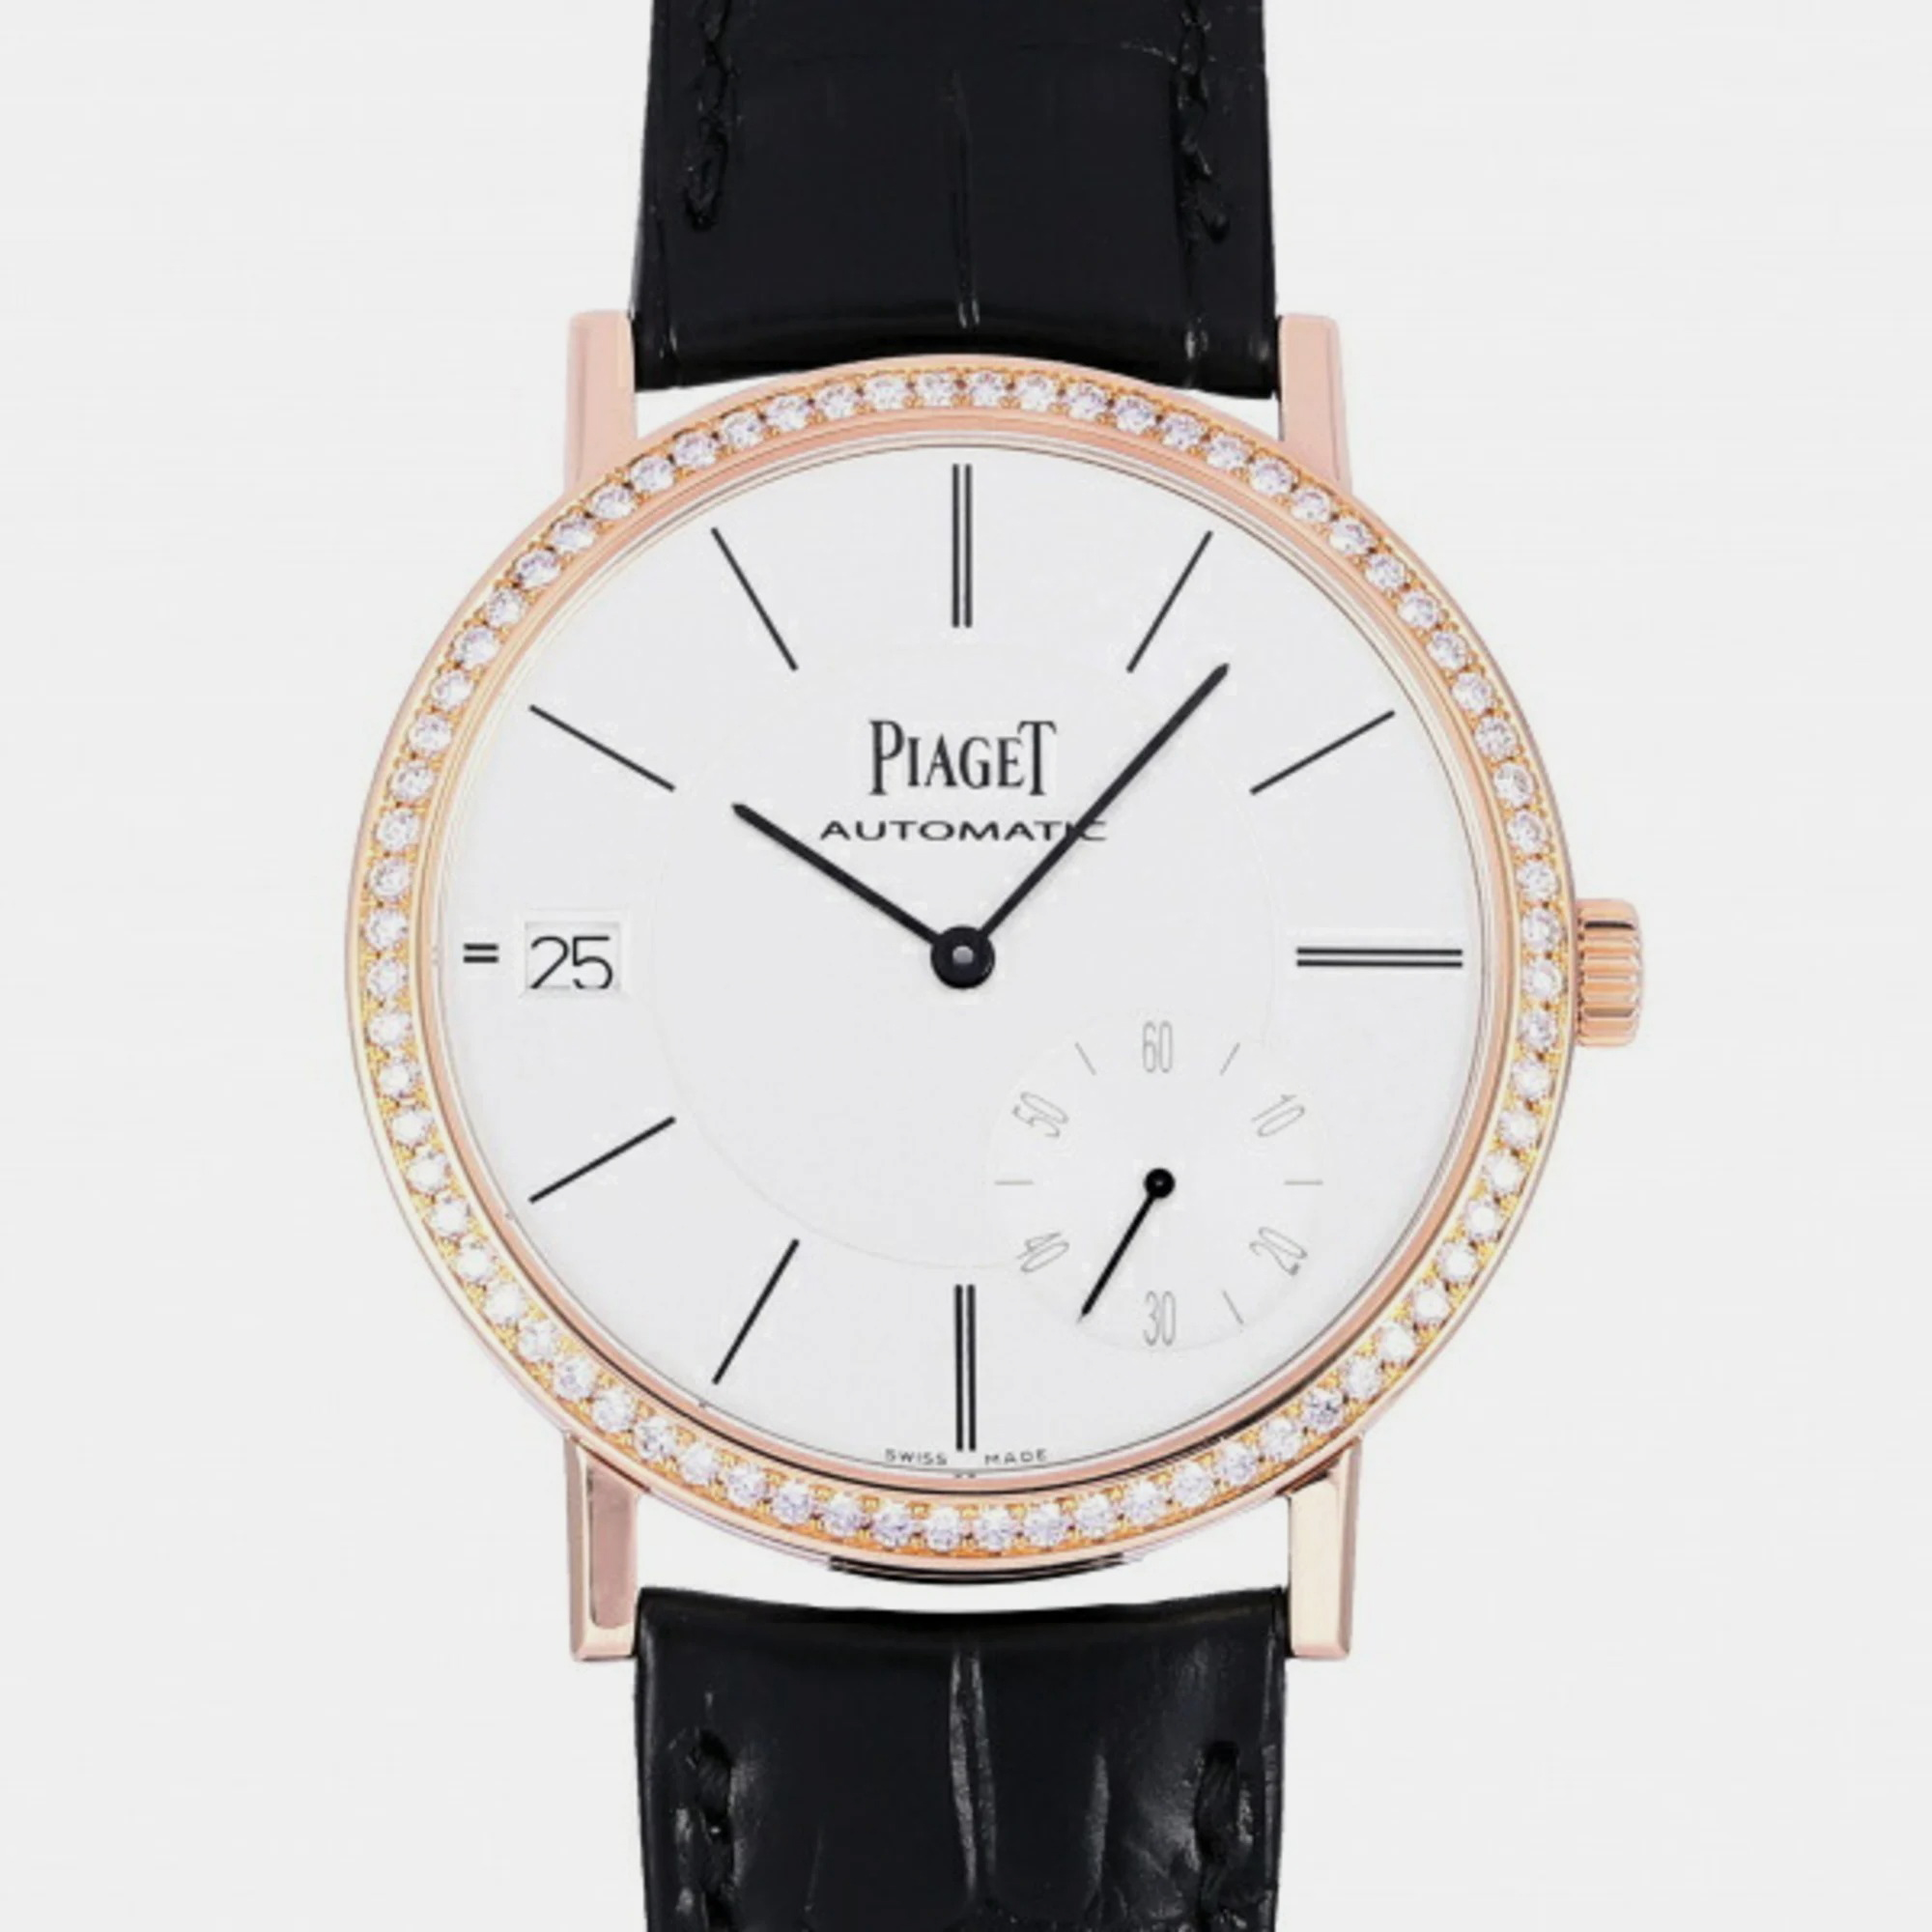 Piaget white 18k rose gold altiplano g0a38139 automatic men's wristwatch 40 mm